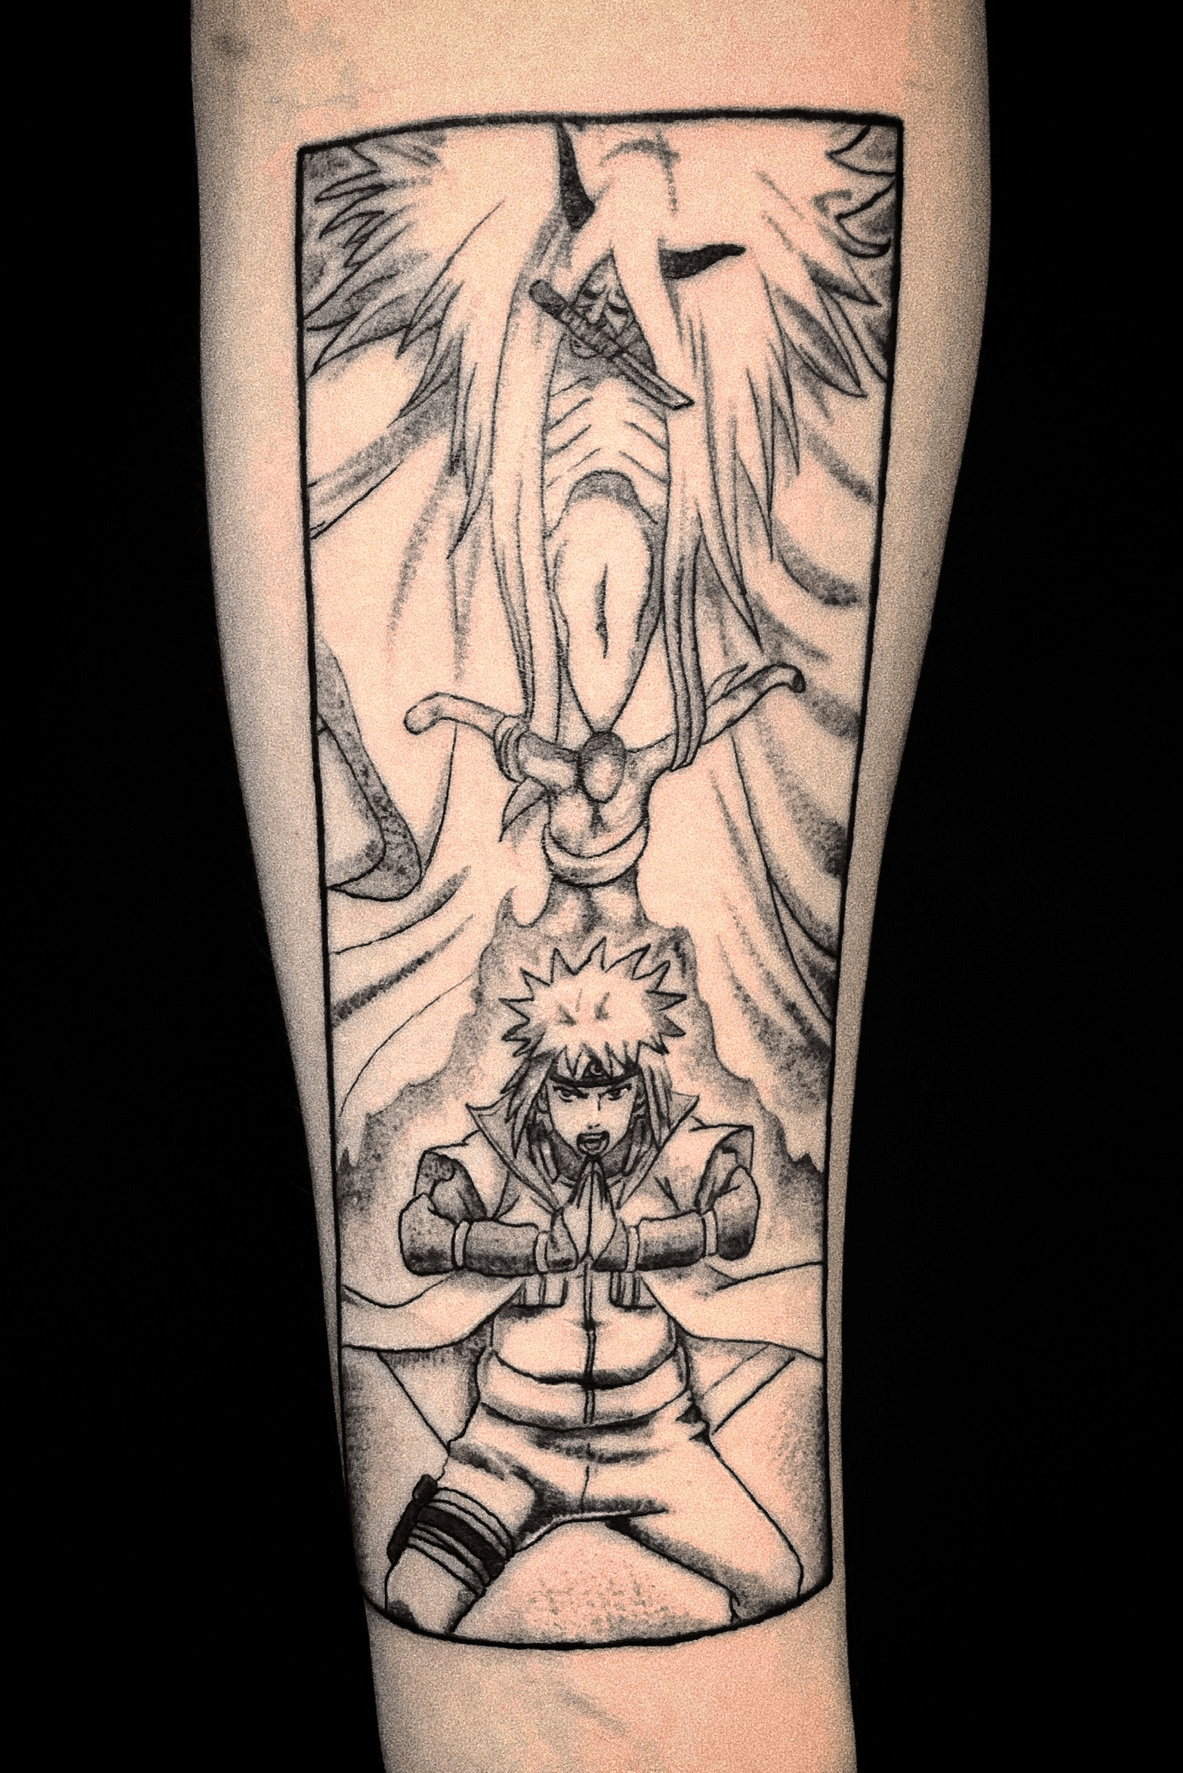 Tattooed this Reaper Death Seal today Just wanted to share  rNaruto